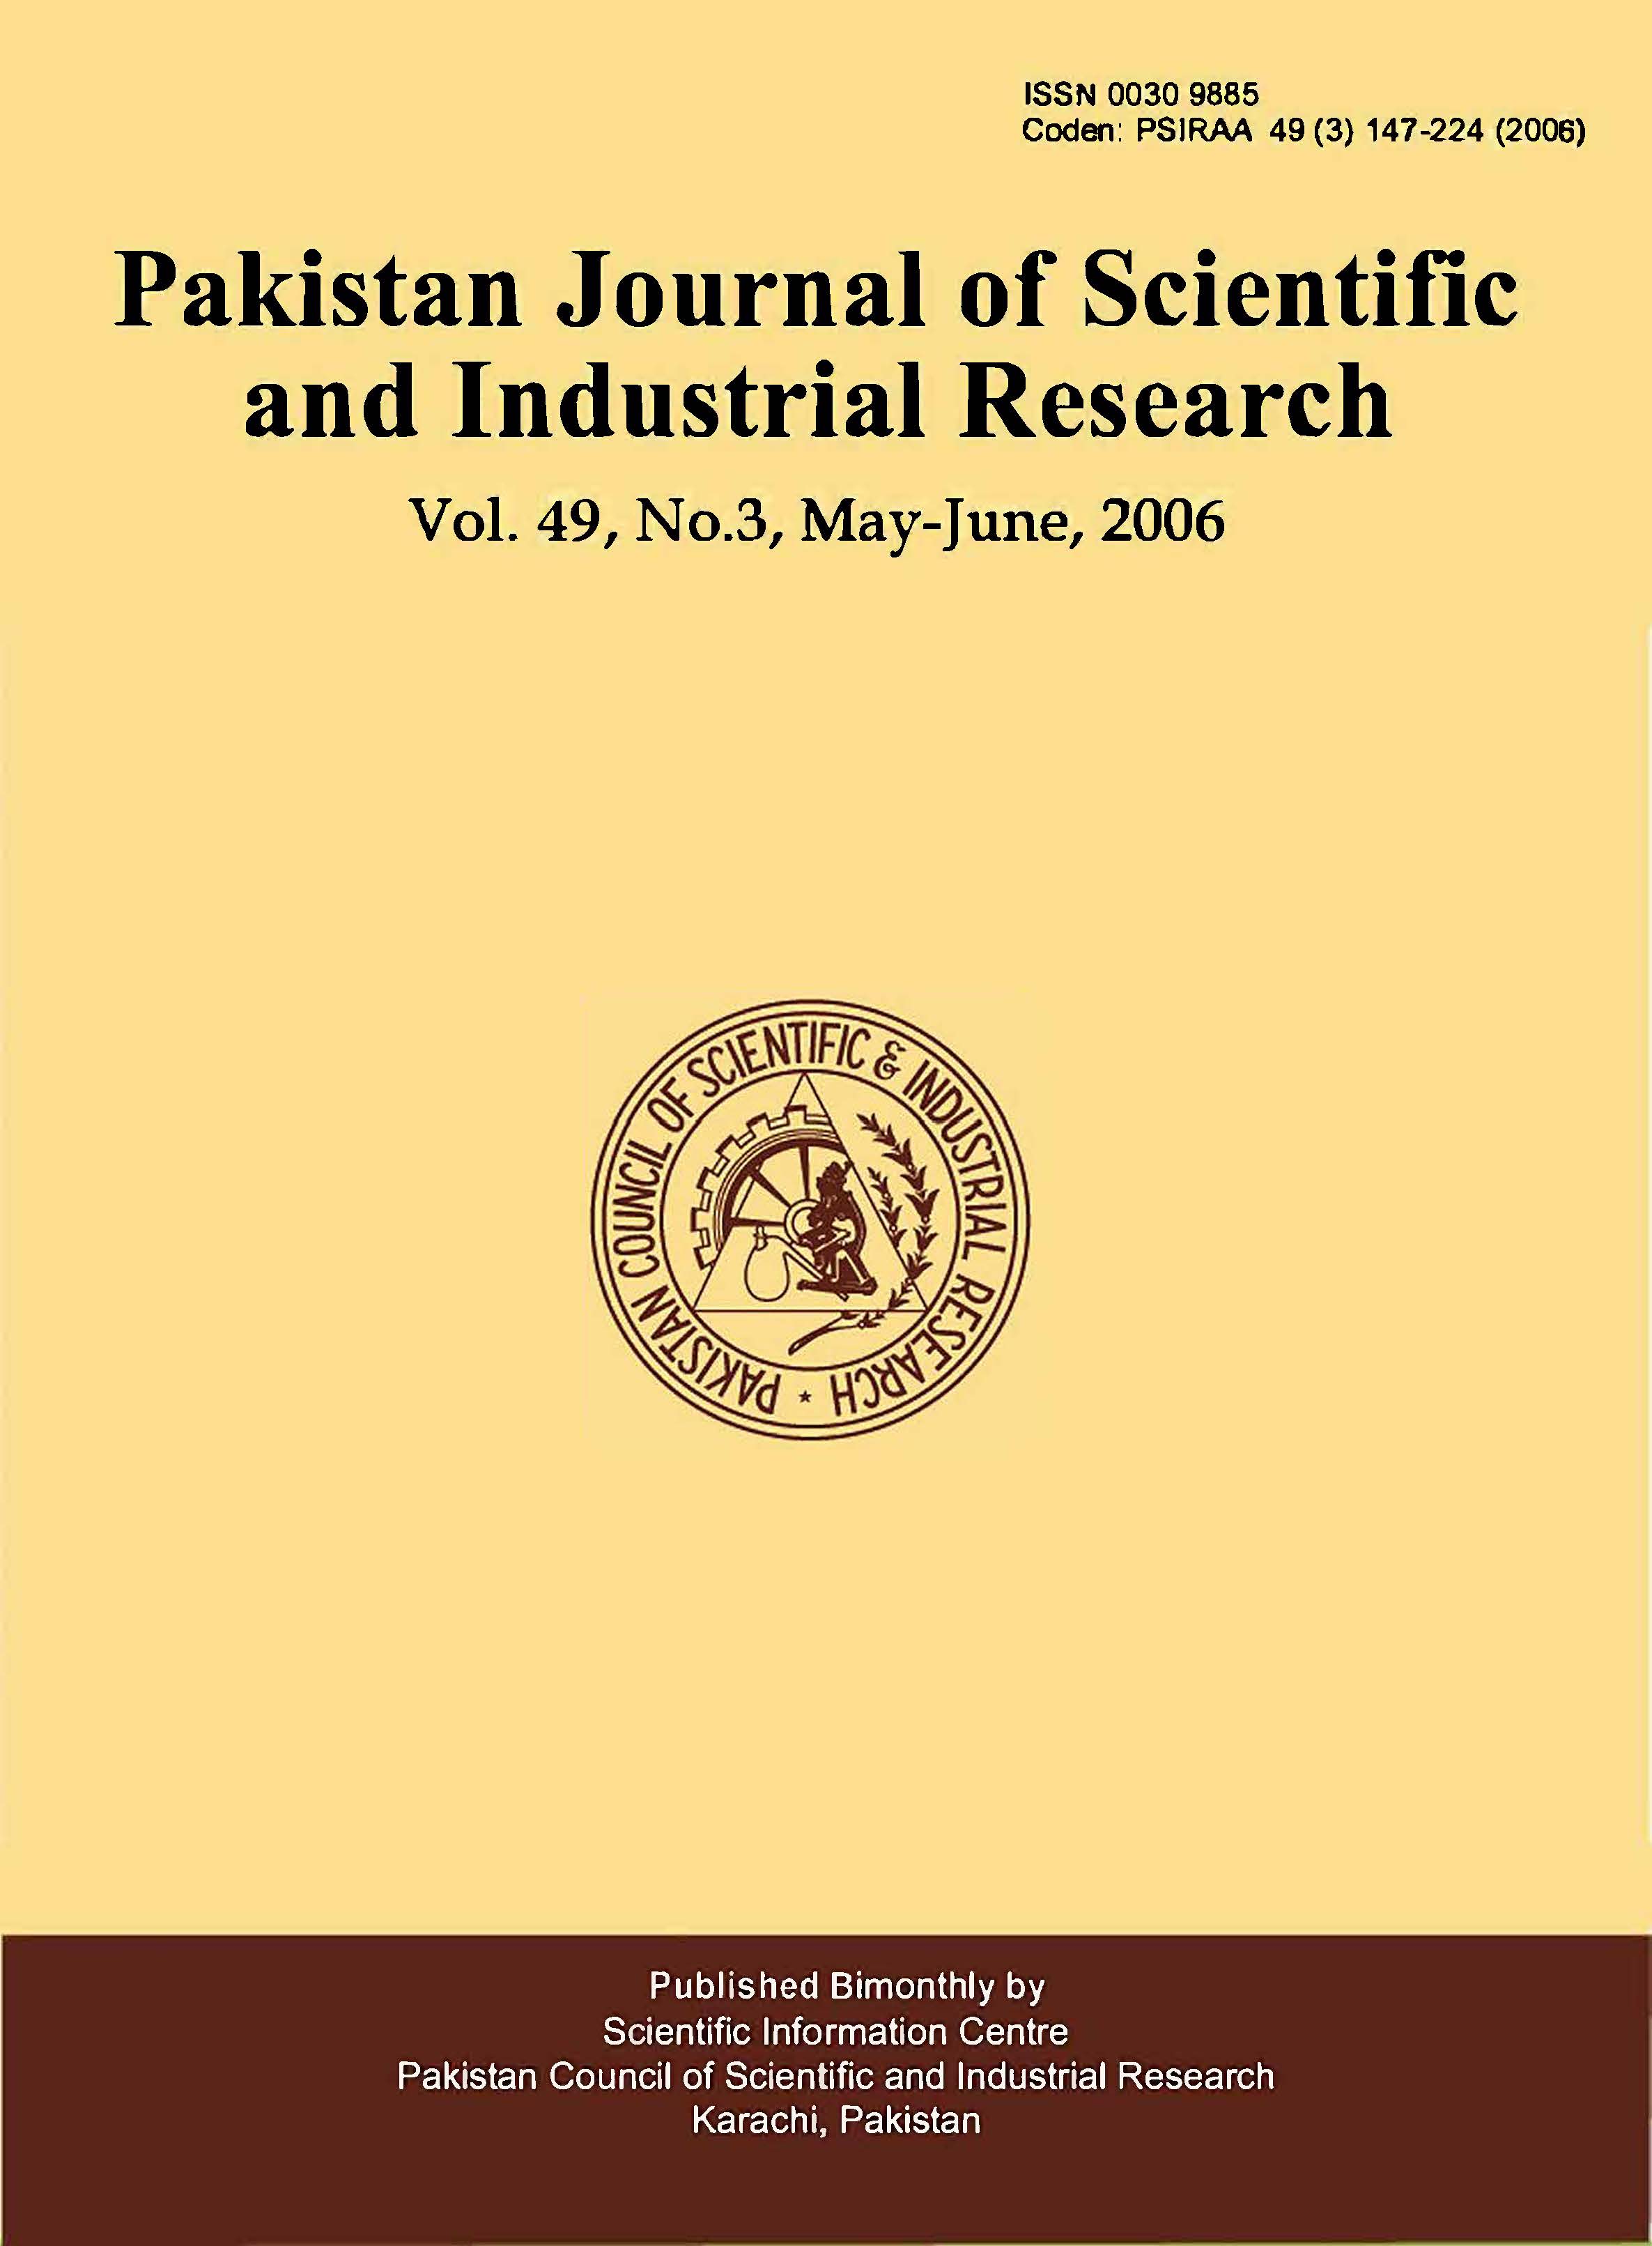 					View Vol. 49 No. 3 (2006): Pakistan Journal of Scientific and Industrial Research
				